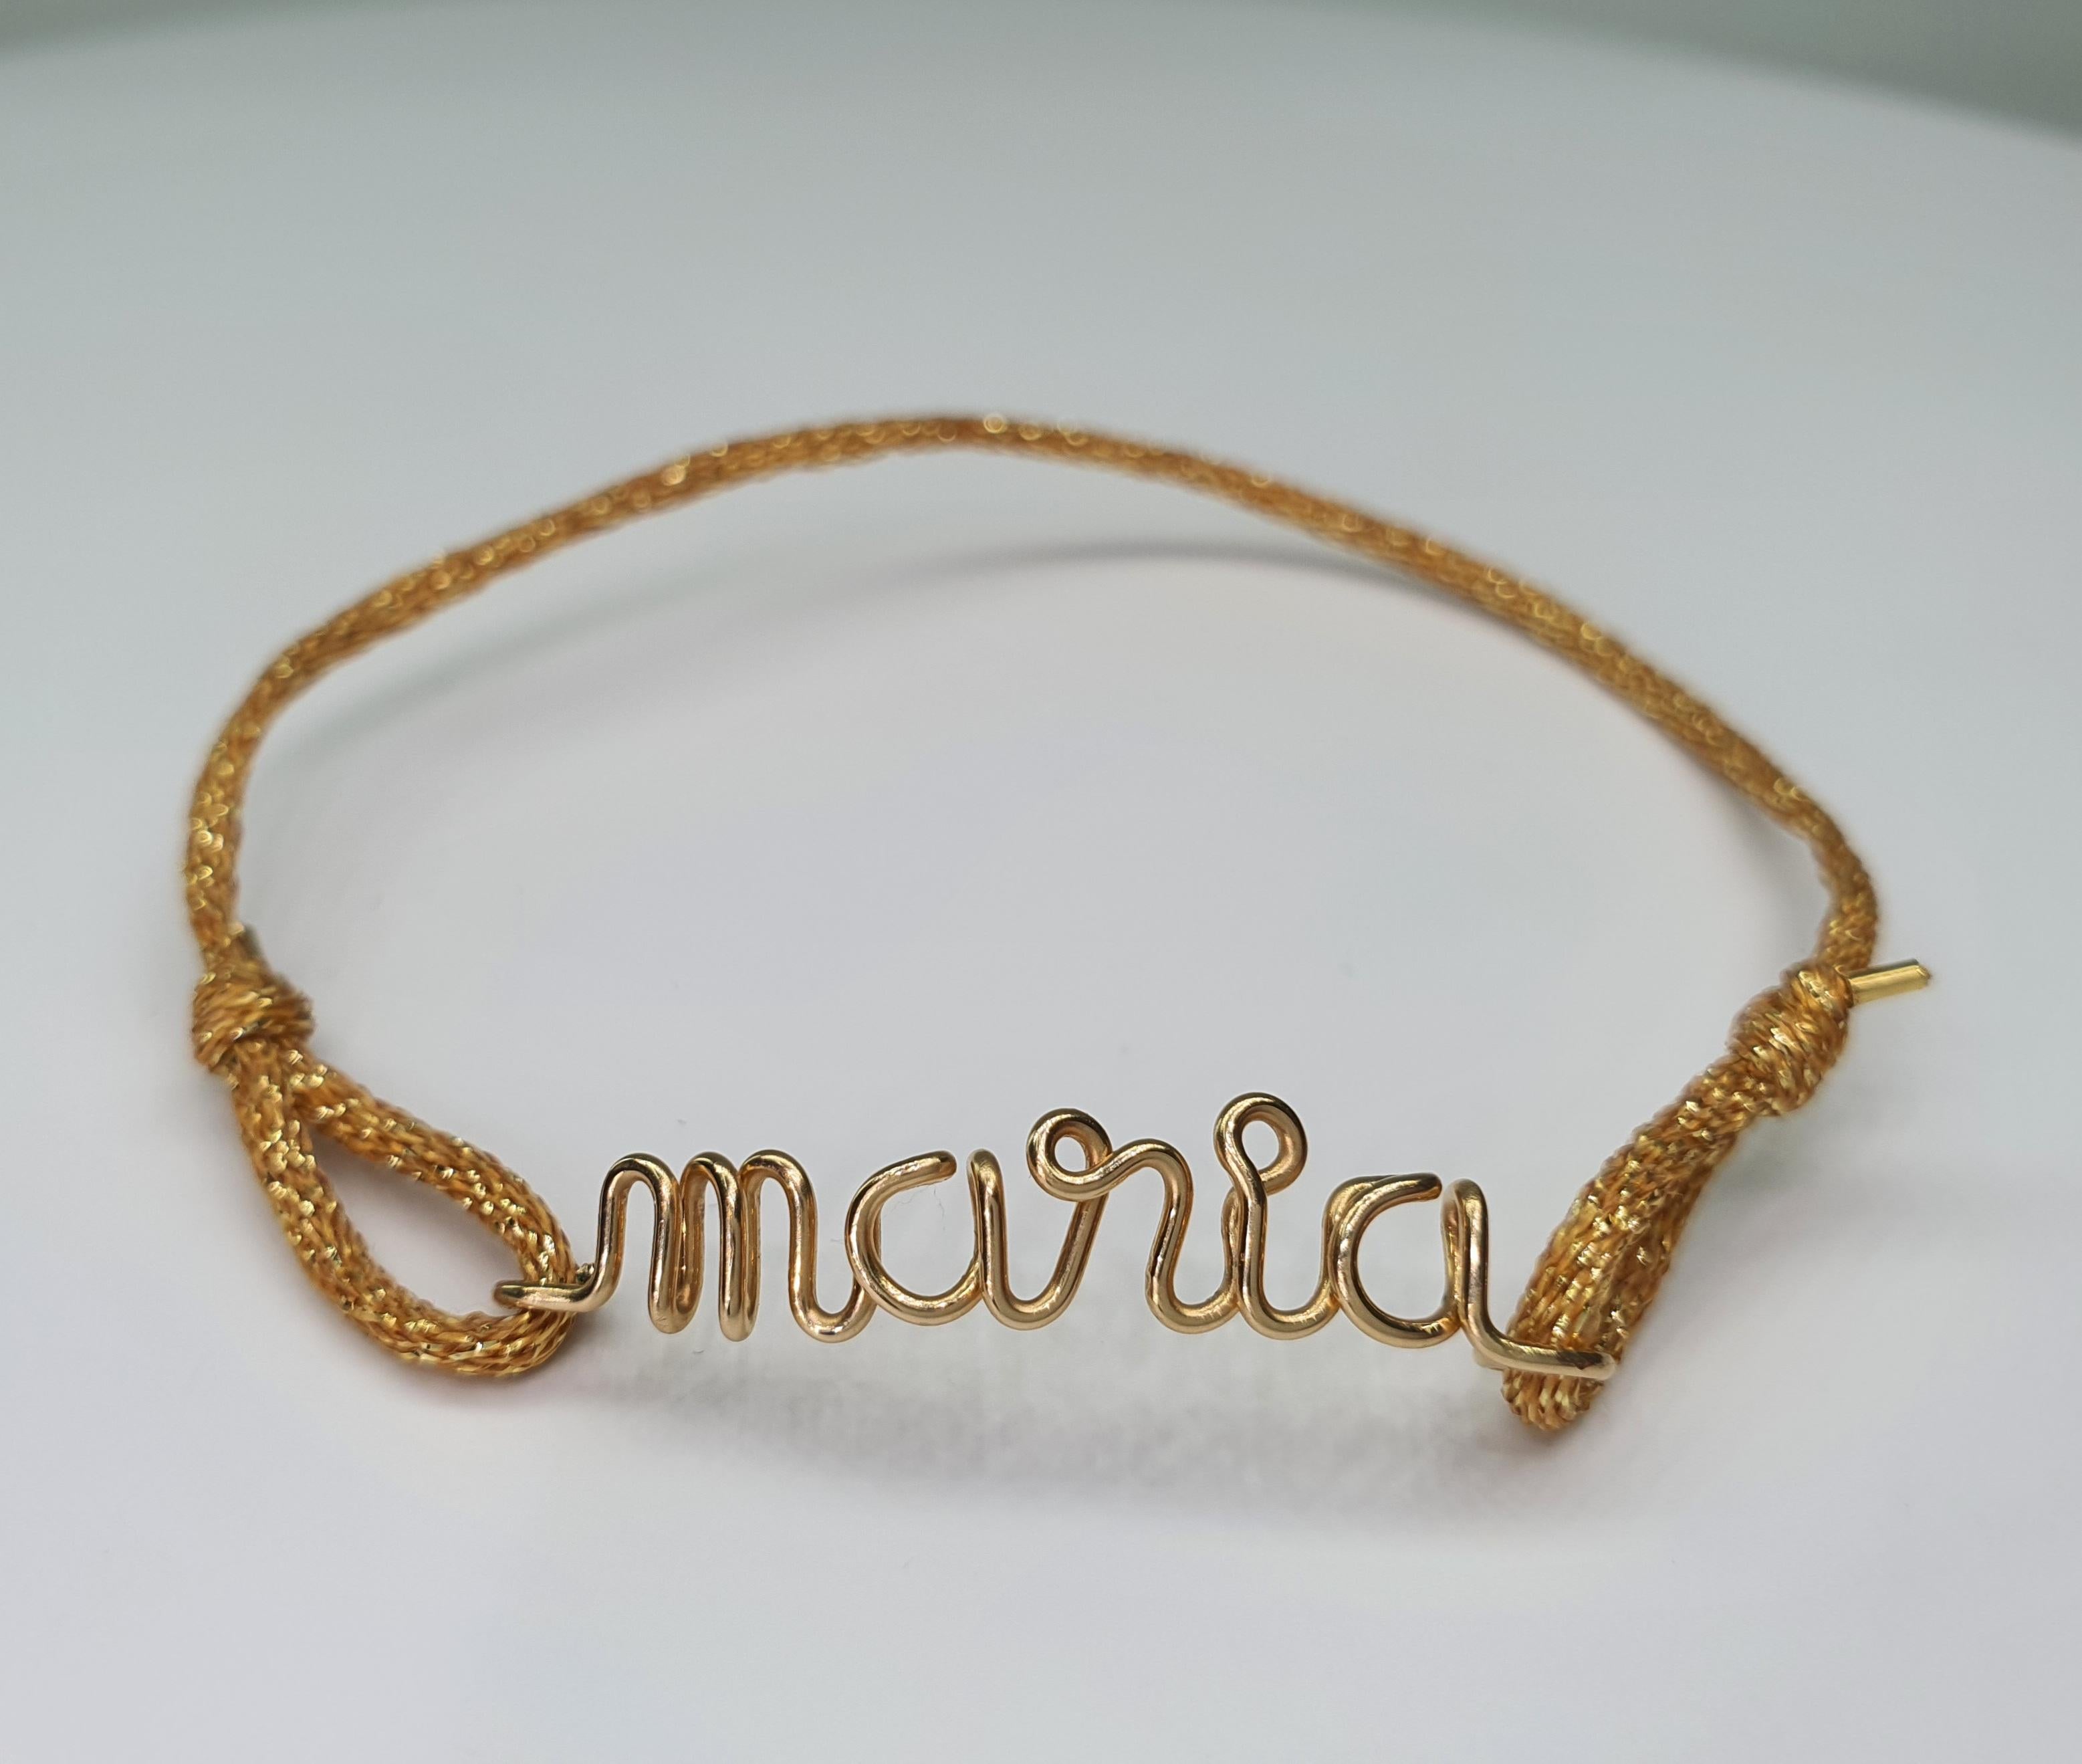 These personalized jewelry are made out of 14k yellow or pink goldfilled wire, sterling silver. Each piece is handcrafted.
So many feelings and emotions can be expressed in words!  Especially if they are presented in a beautiful jewelry form.
Our